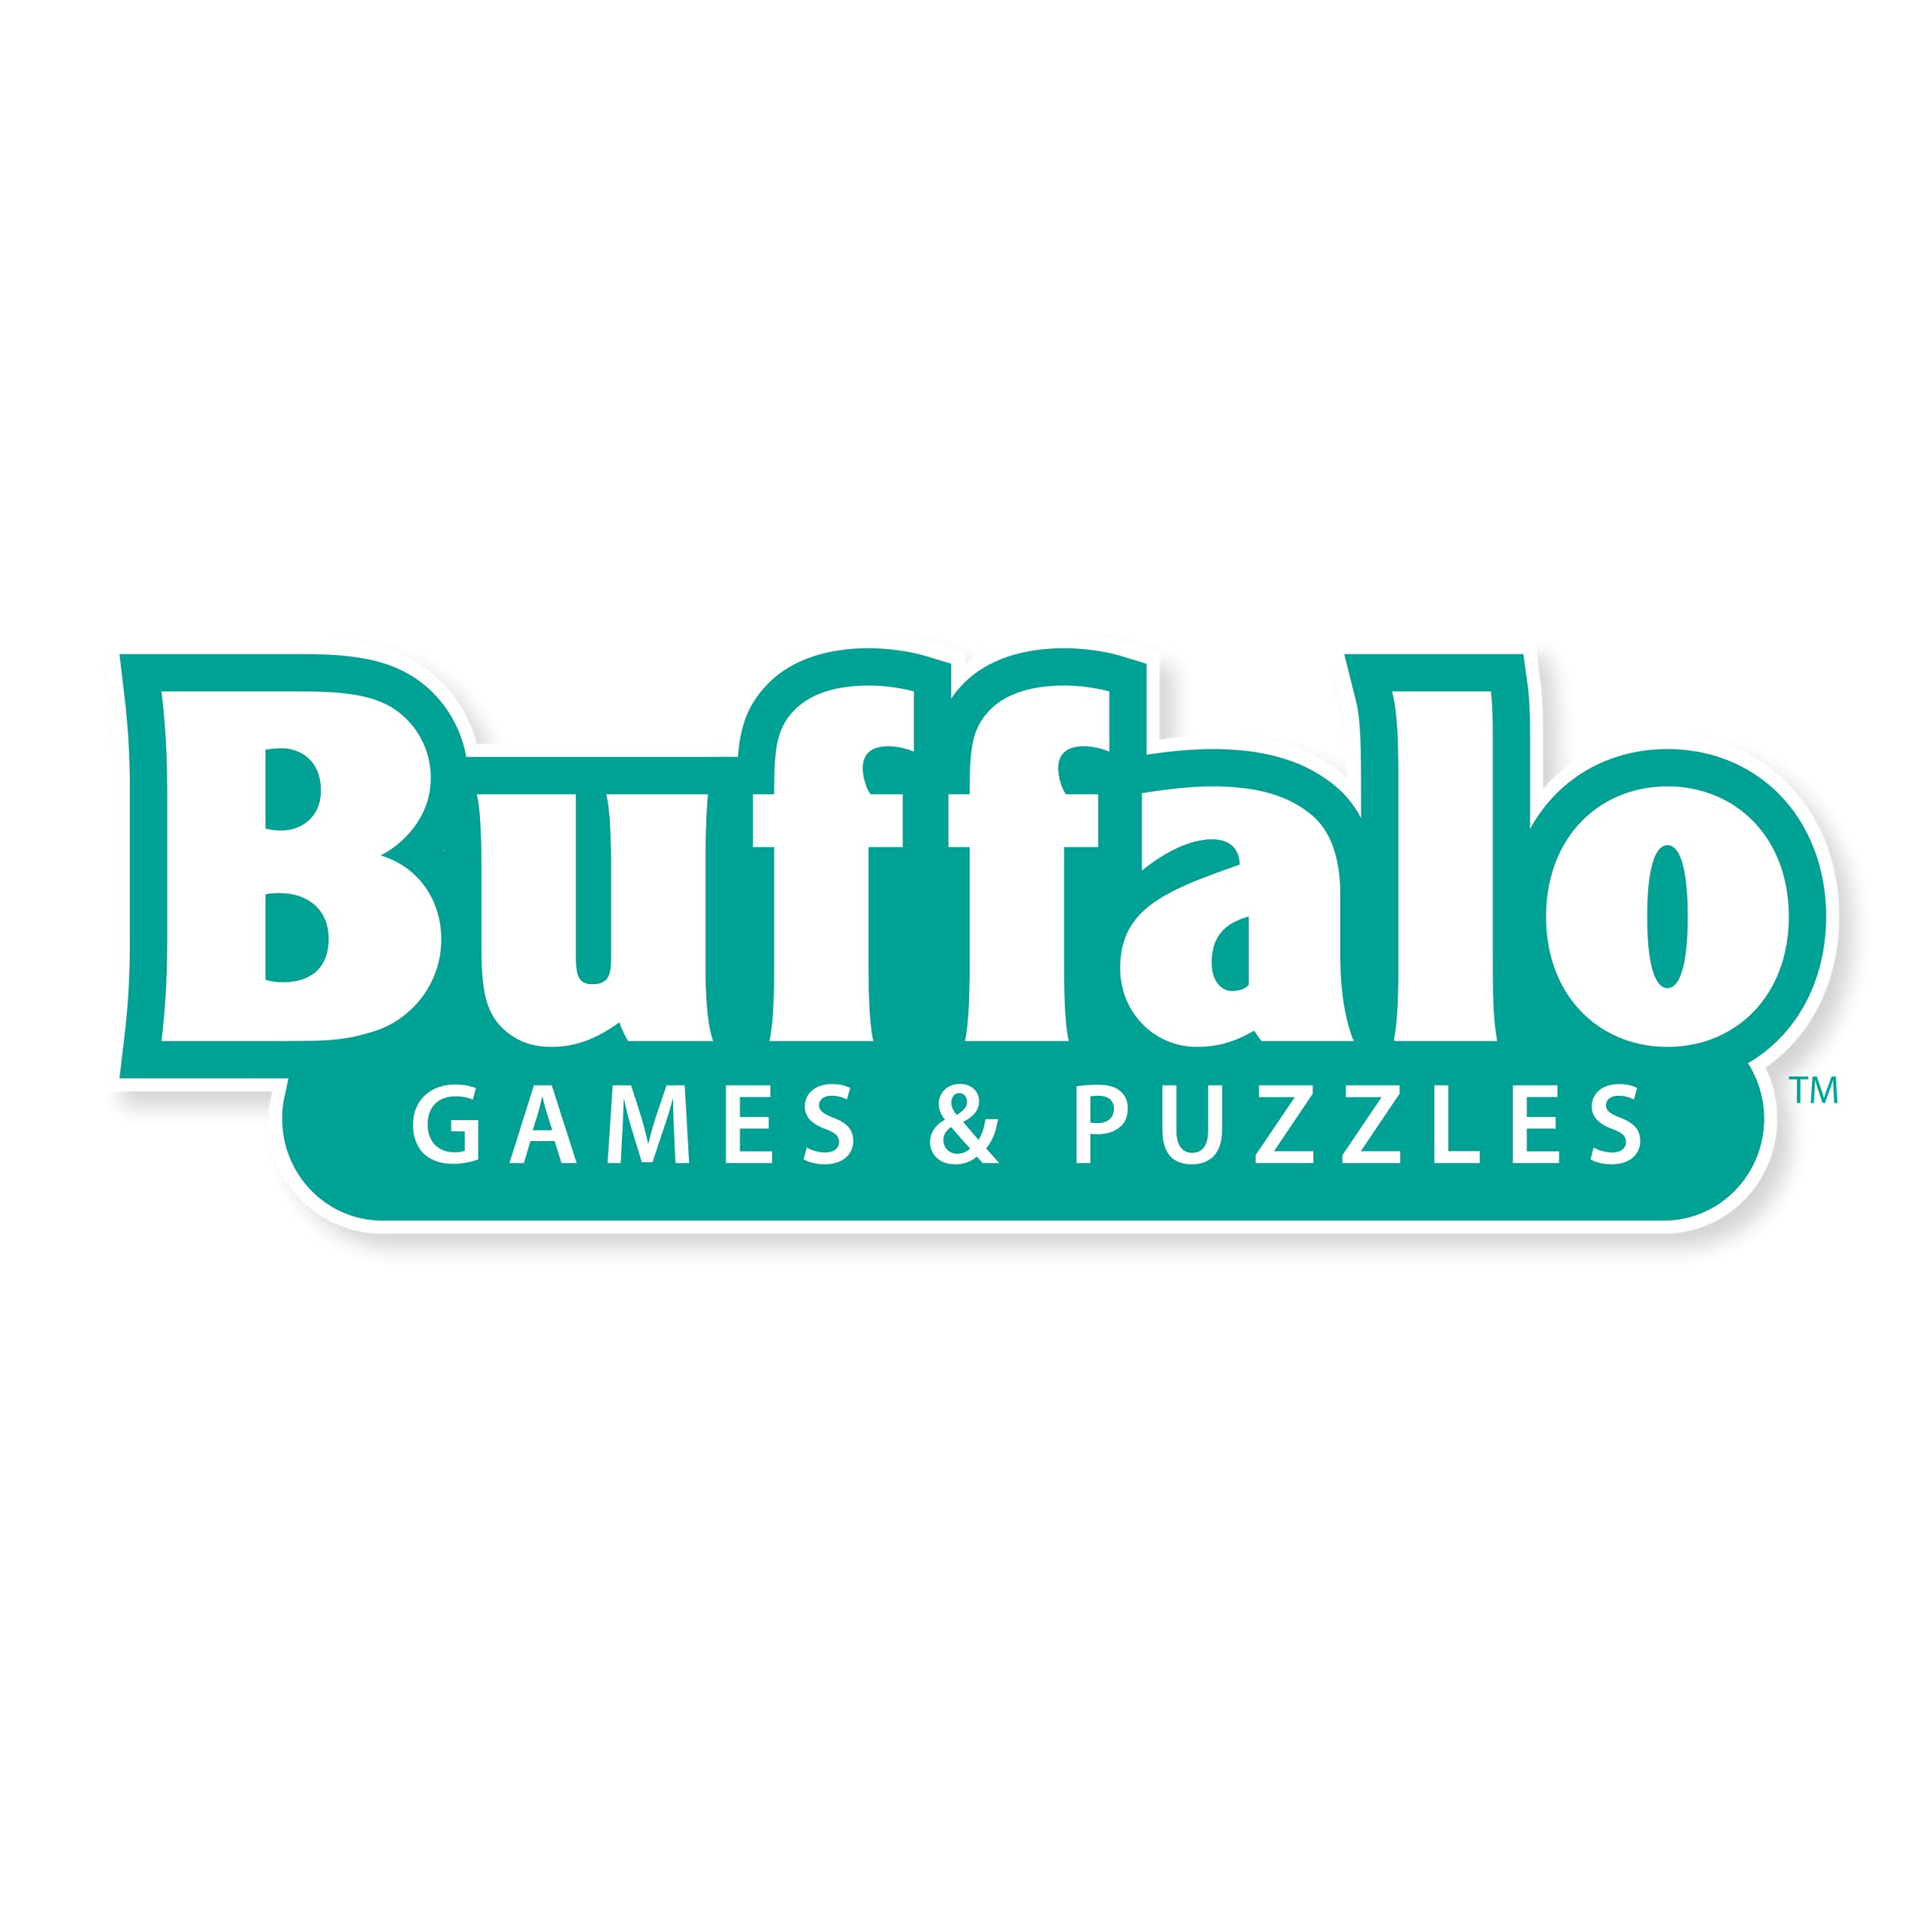 Buffalo Games - You're On Mute Game